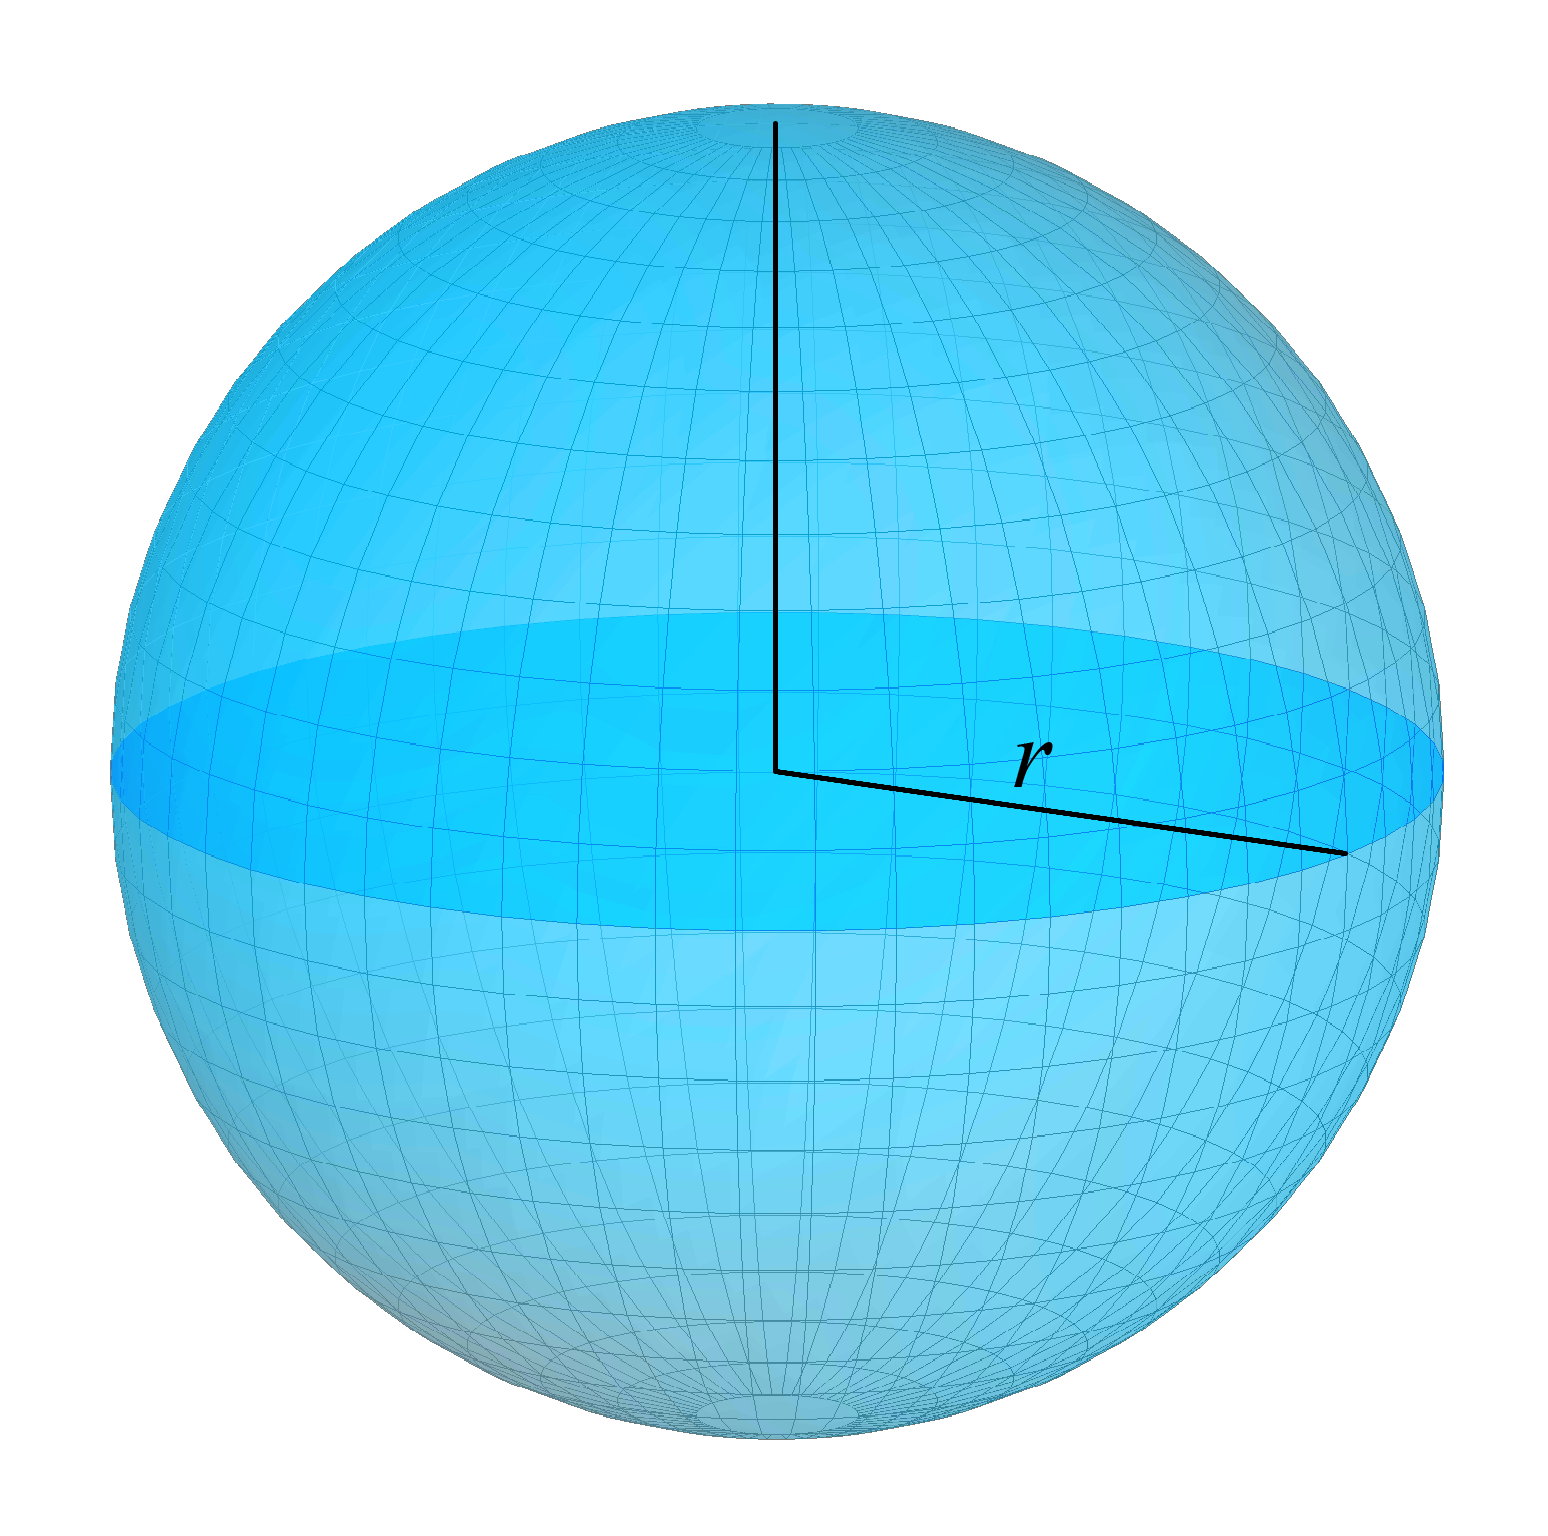 Total surface area of sphere image